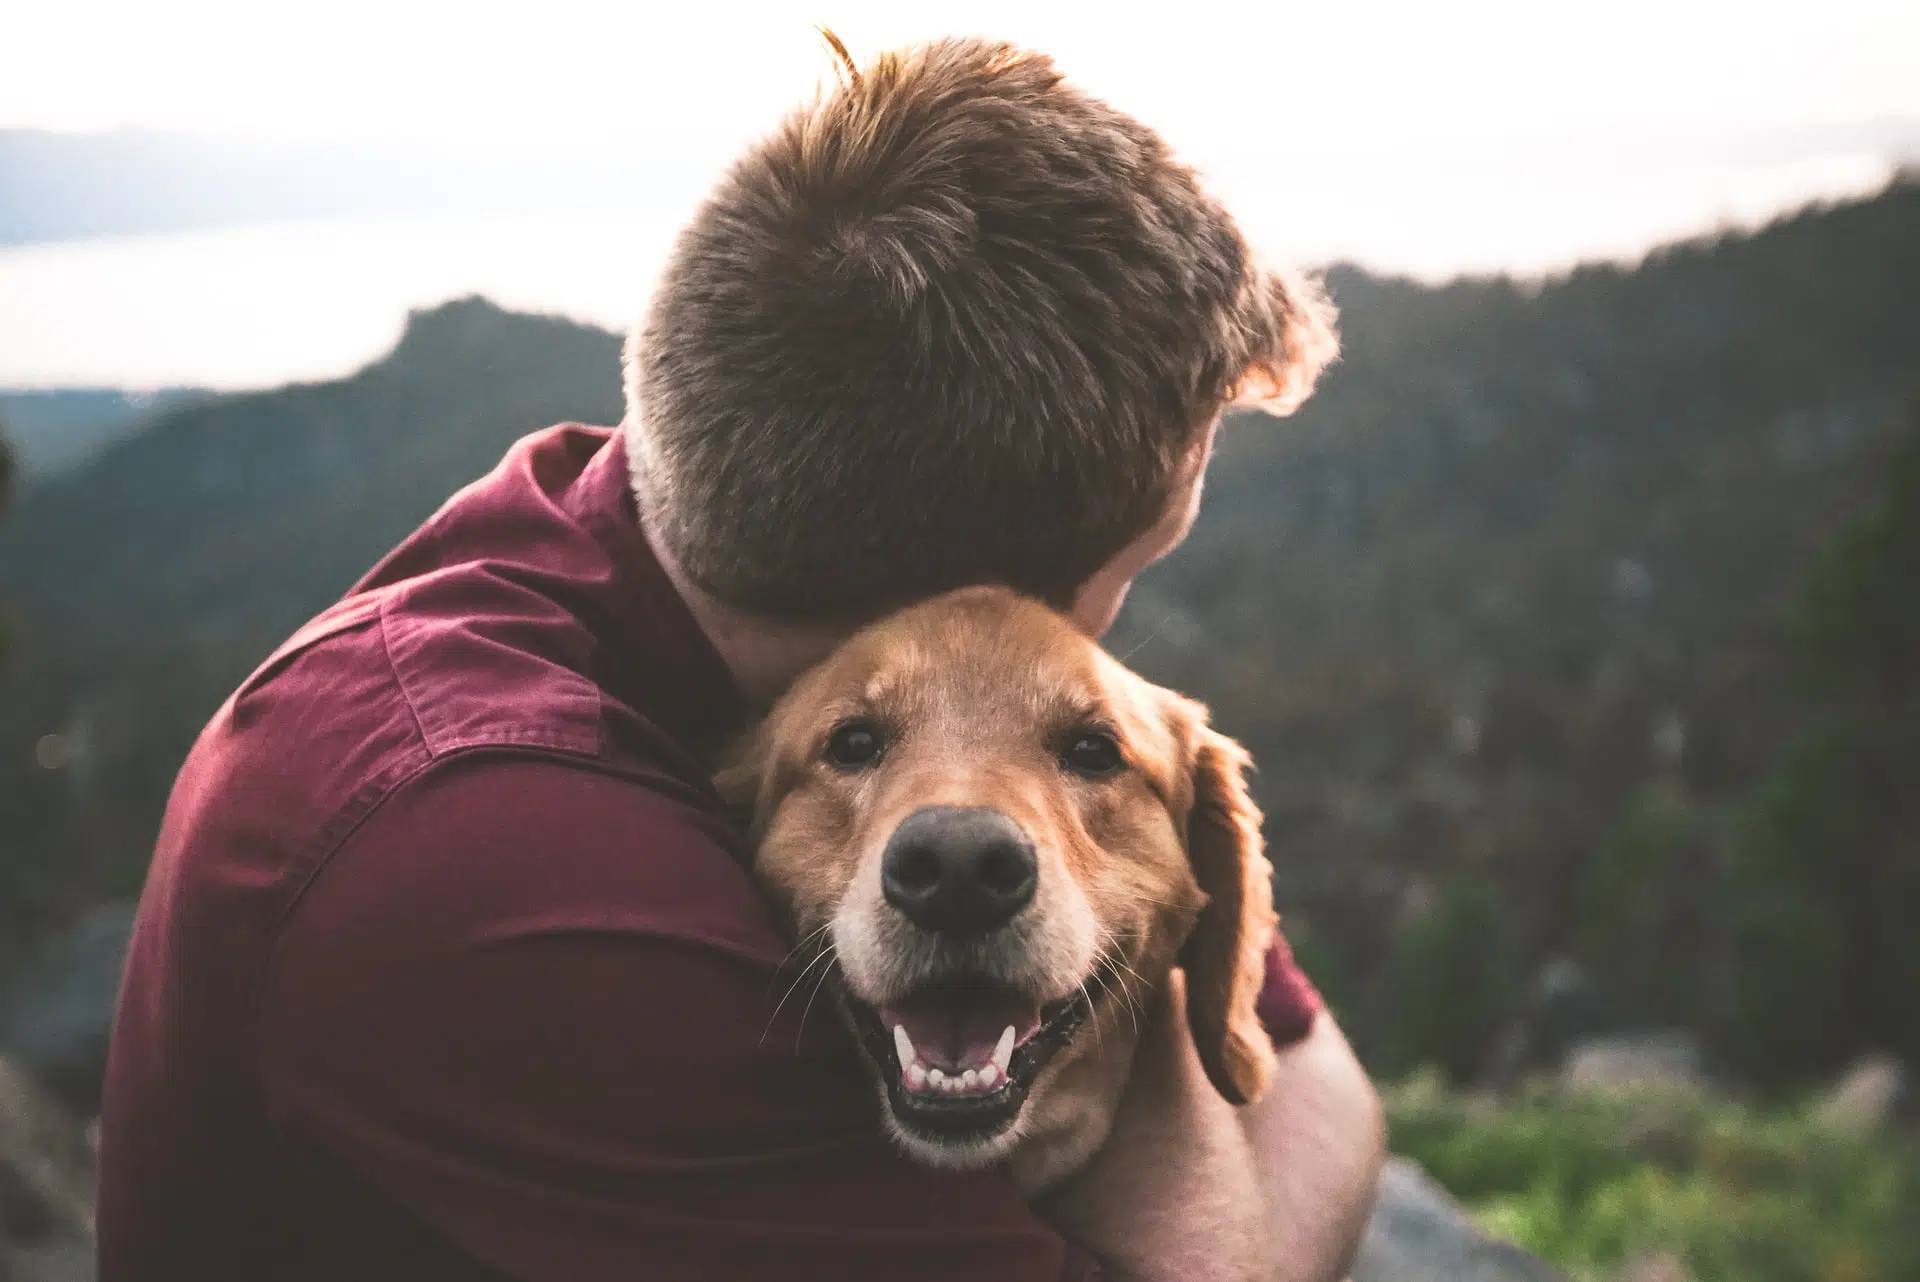 A dog smiling while getting hugged by its owner